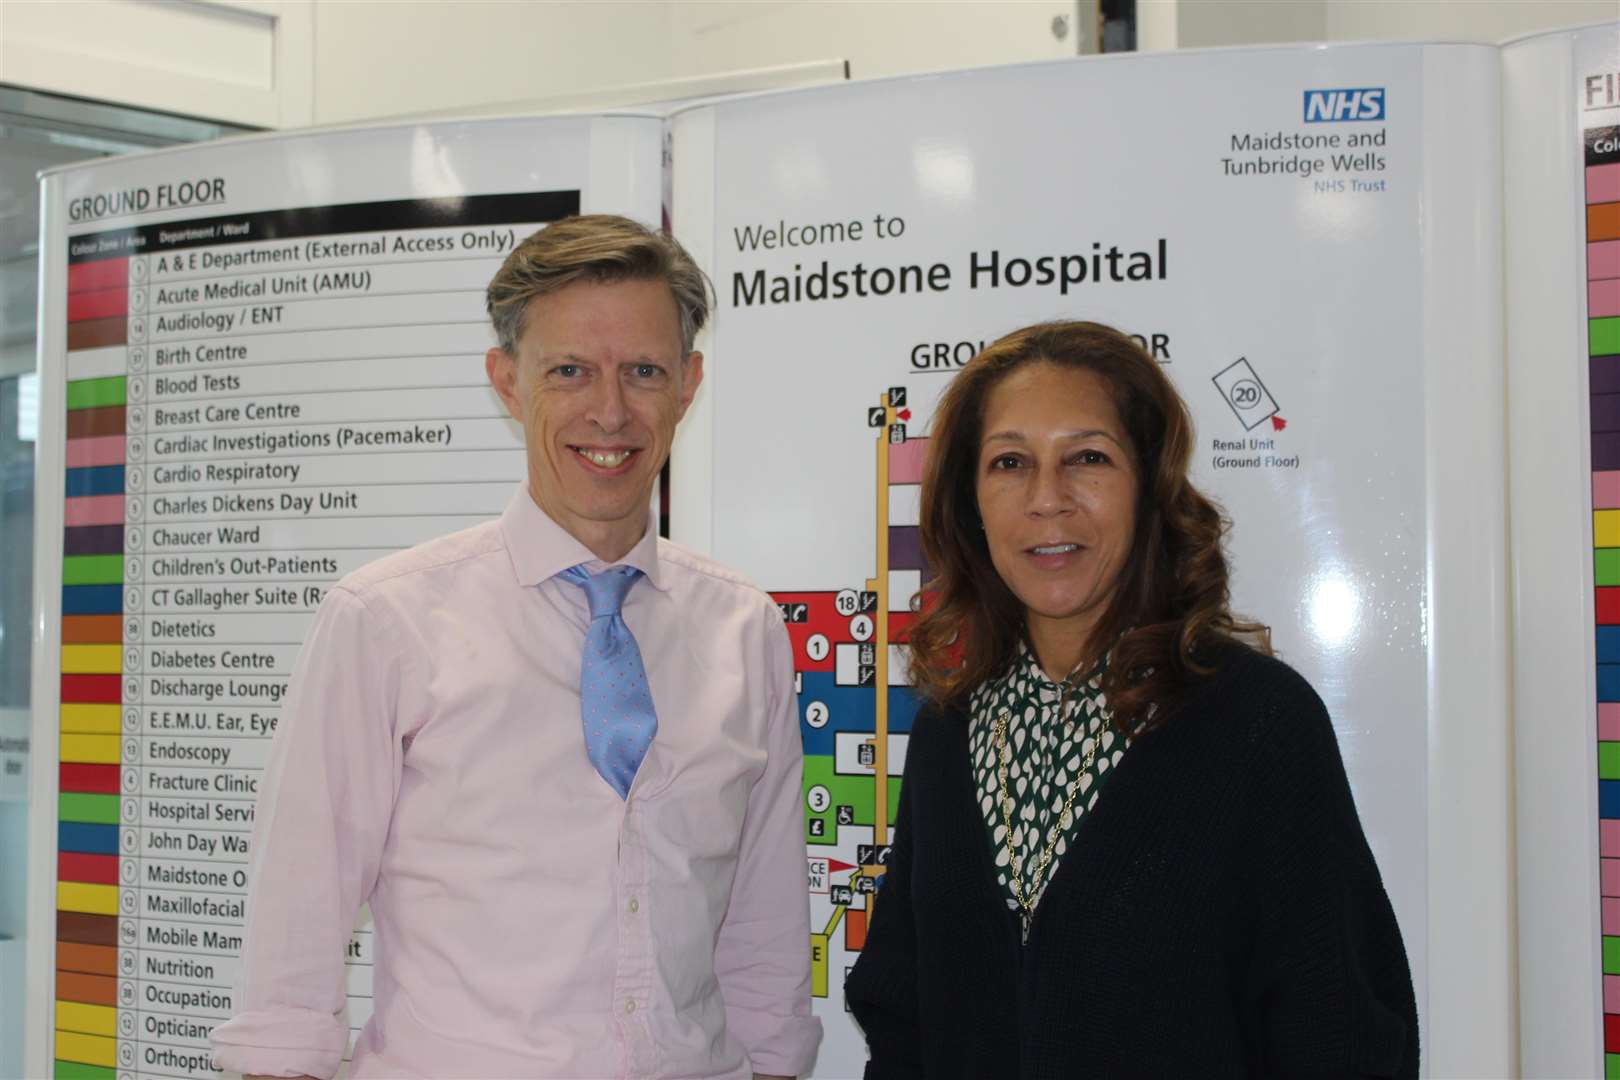 Helen Grant MP and Maidstone and Tunbridge Wells NHS Trust Chief Executive Miles Scott. (4220943)